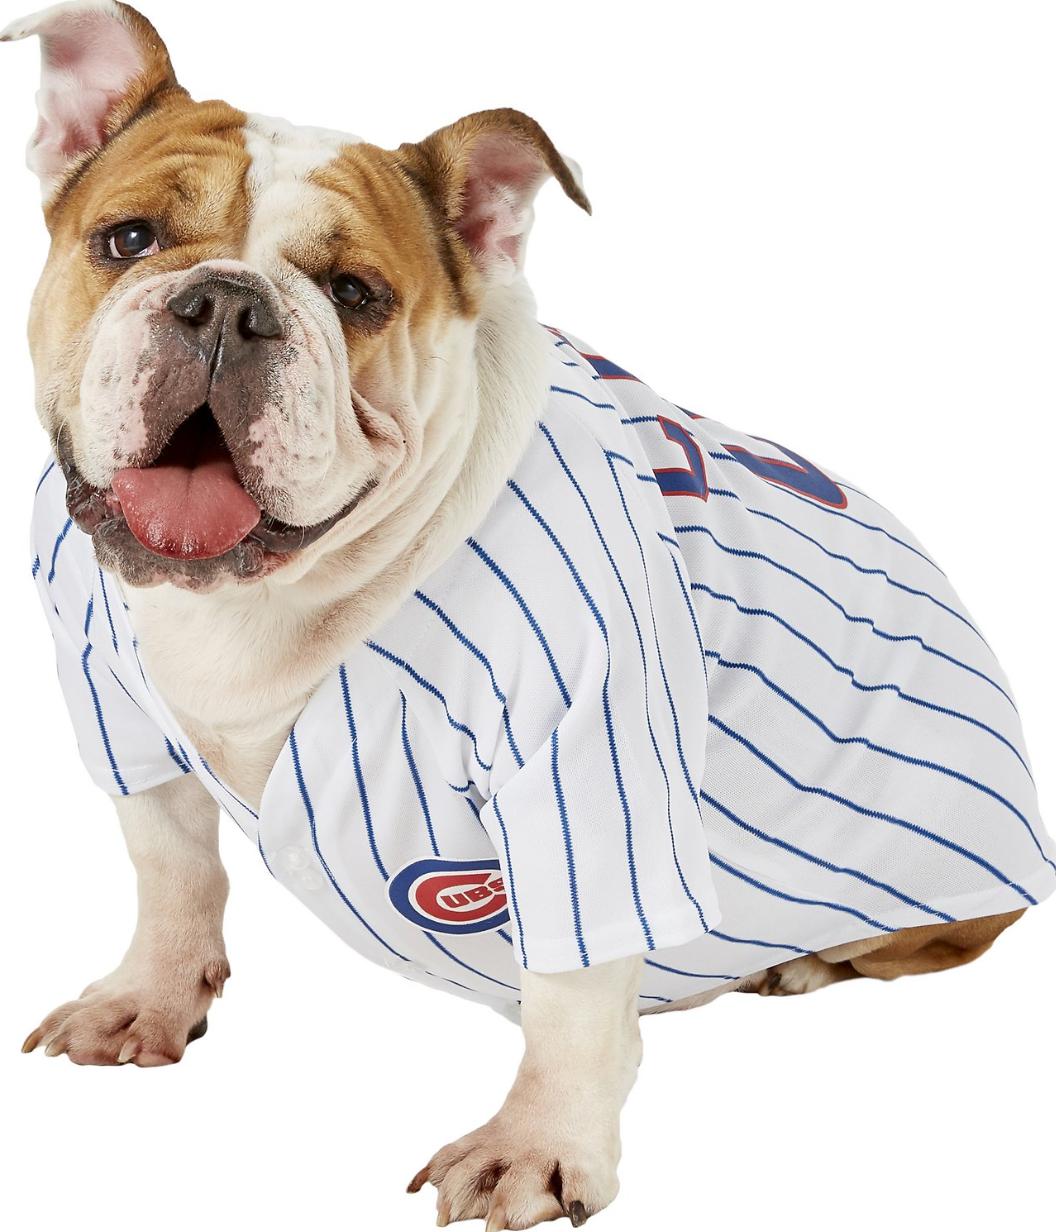  MLB Jersey for Dogs & Cats - Baseball Chicago Cubs